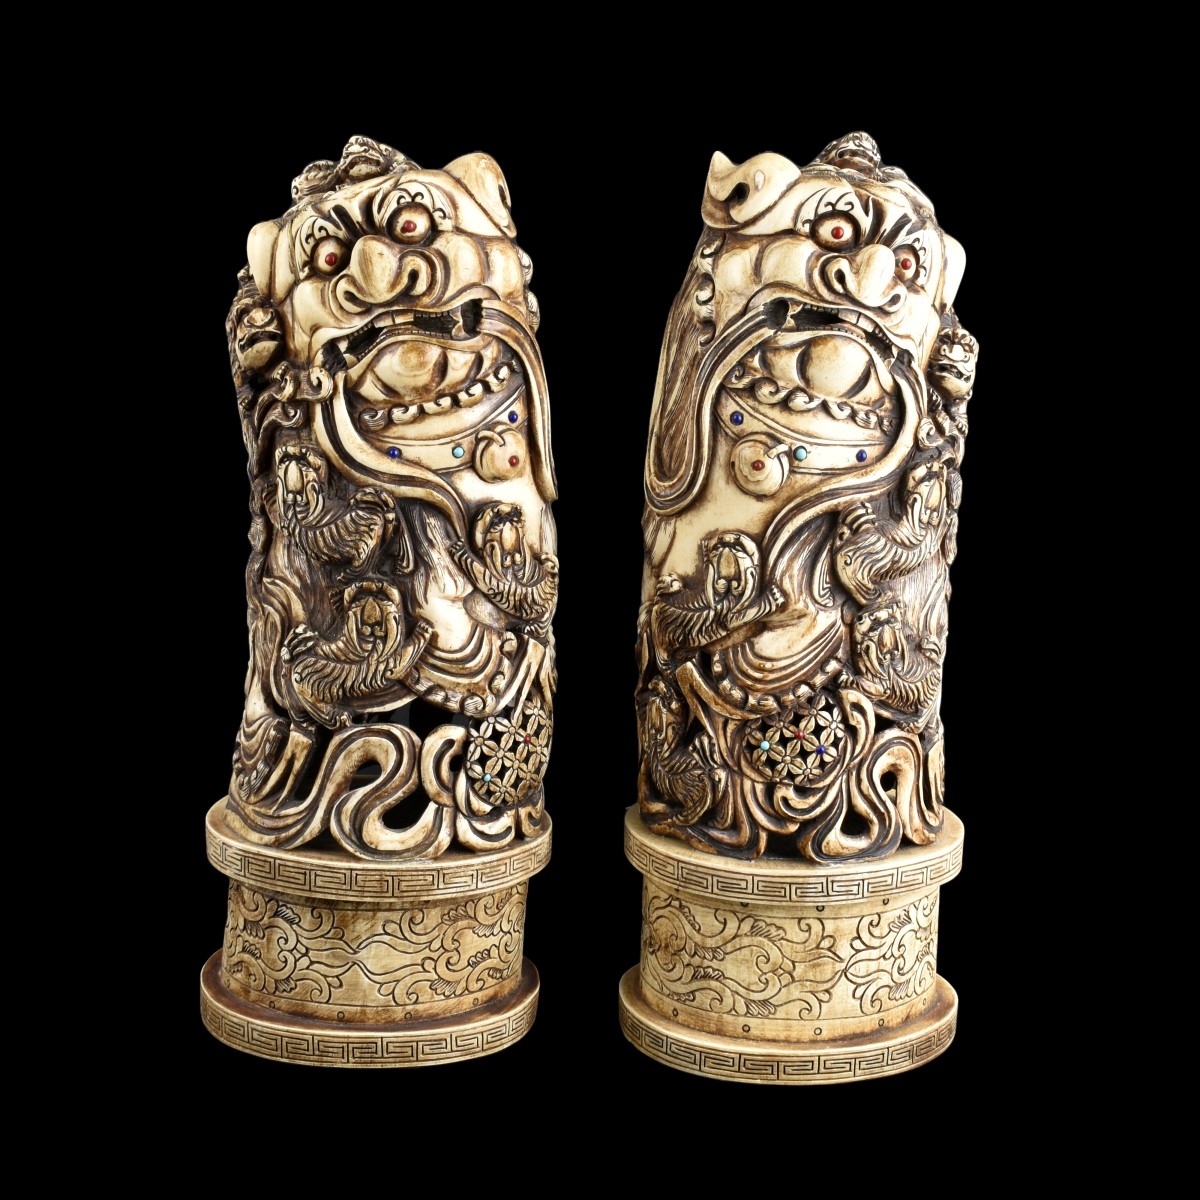 Pair of Chinese Foo Dog Sculptures